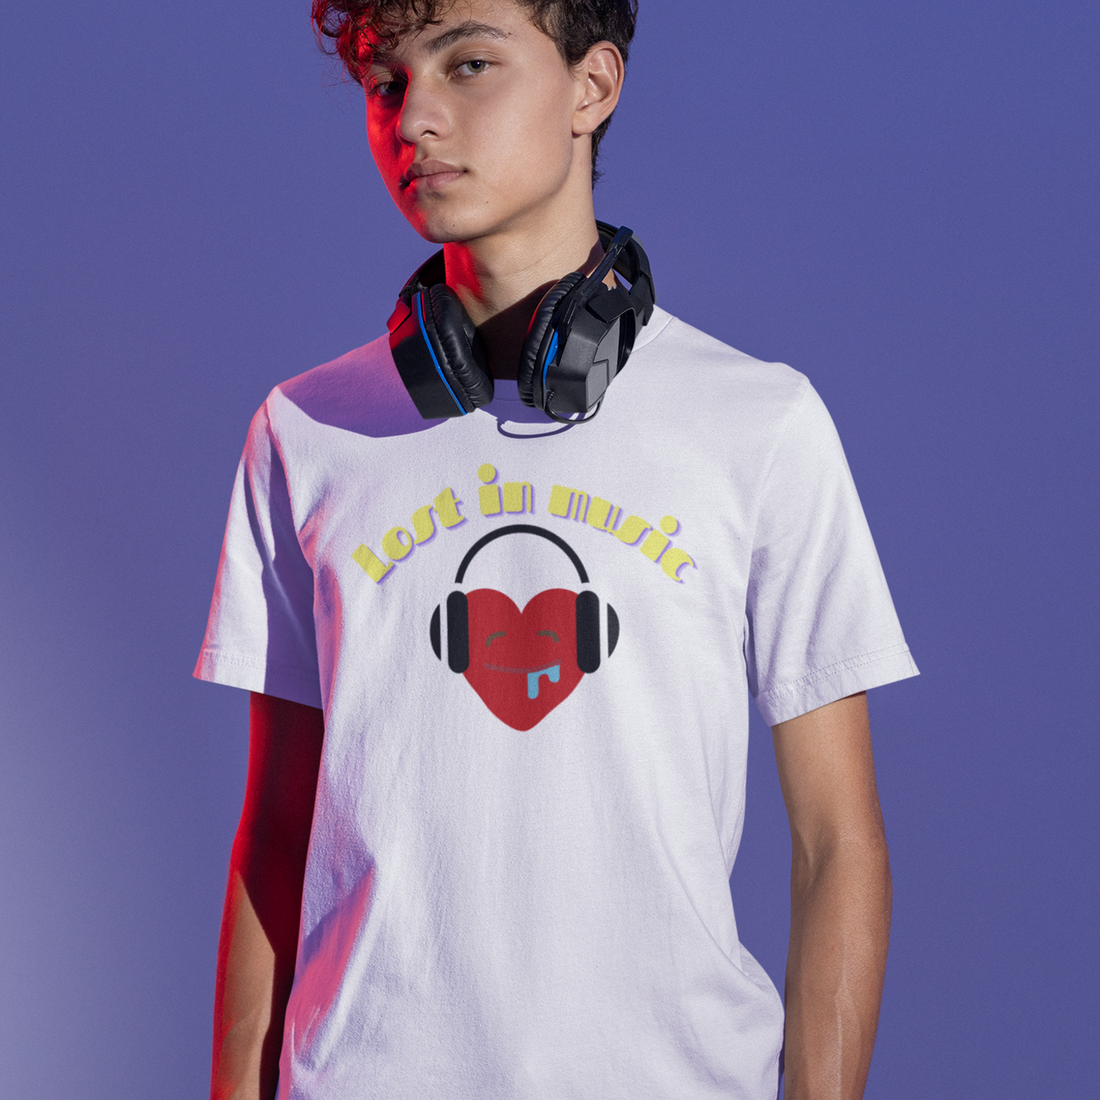 A music tshirt design with the text "lost in music" and the picture of a cartoon heart listening to music in its headphones. A music tshirt for music lovers